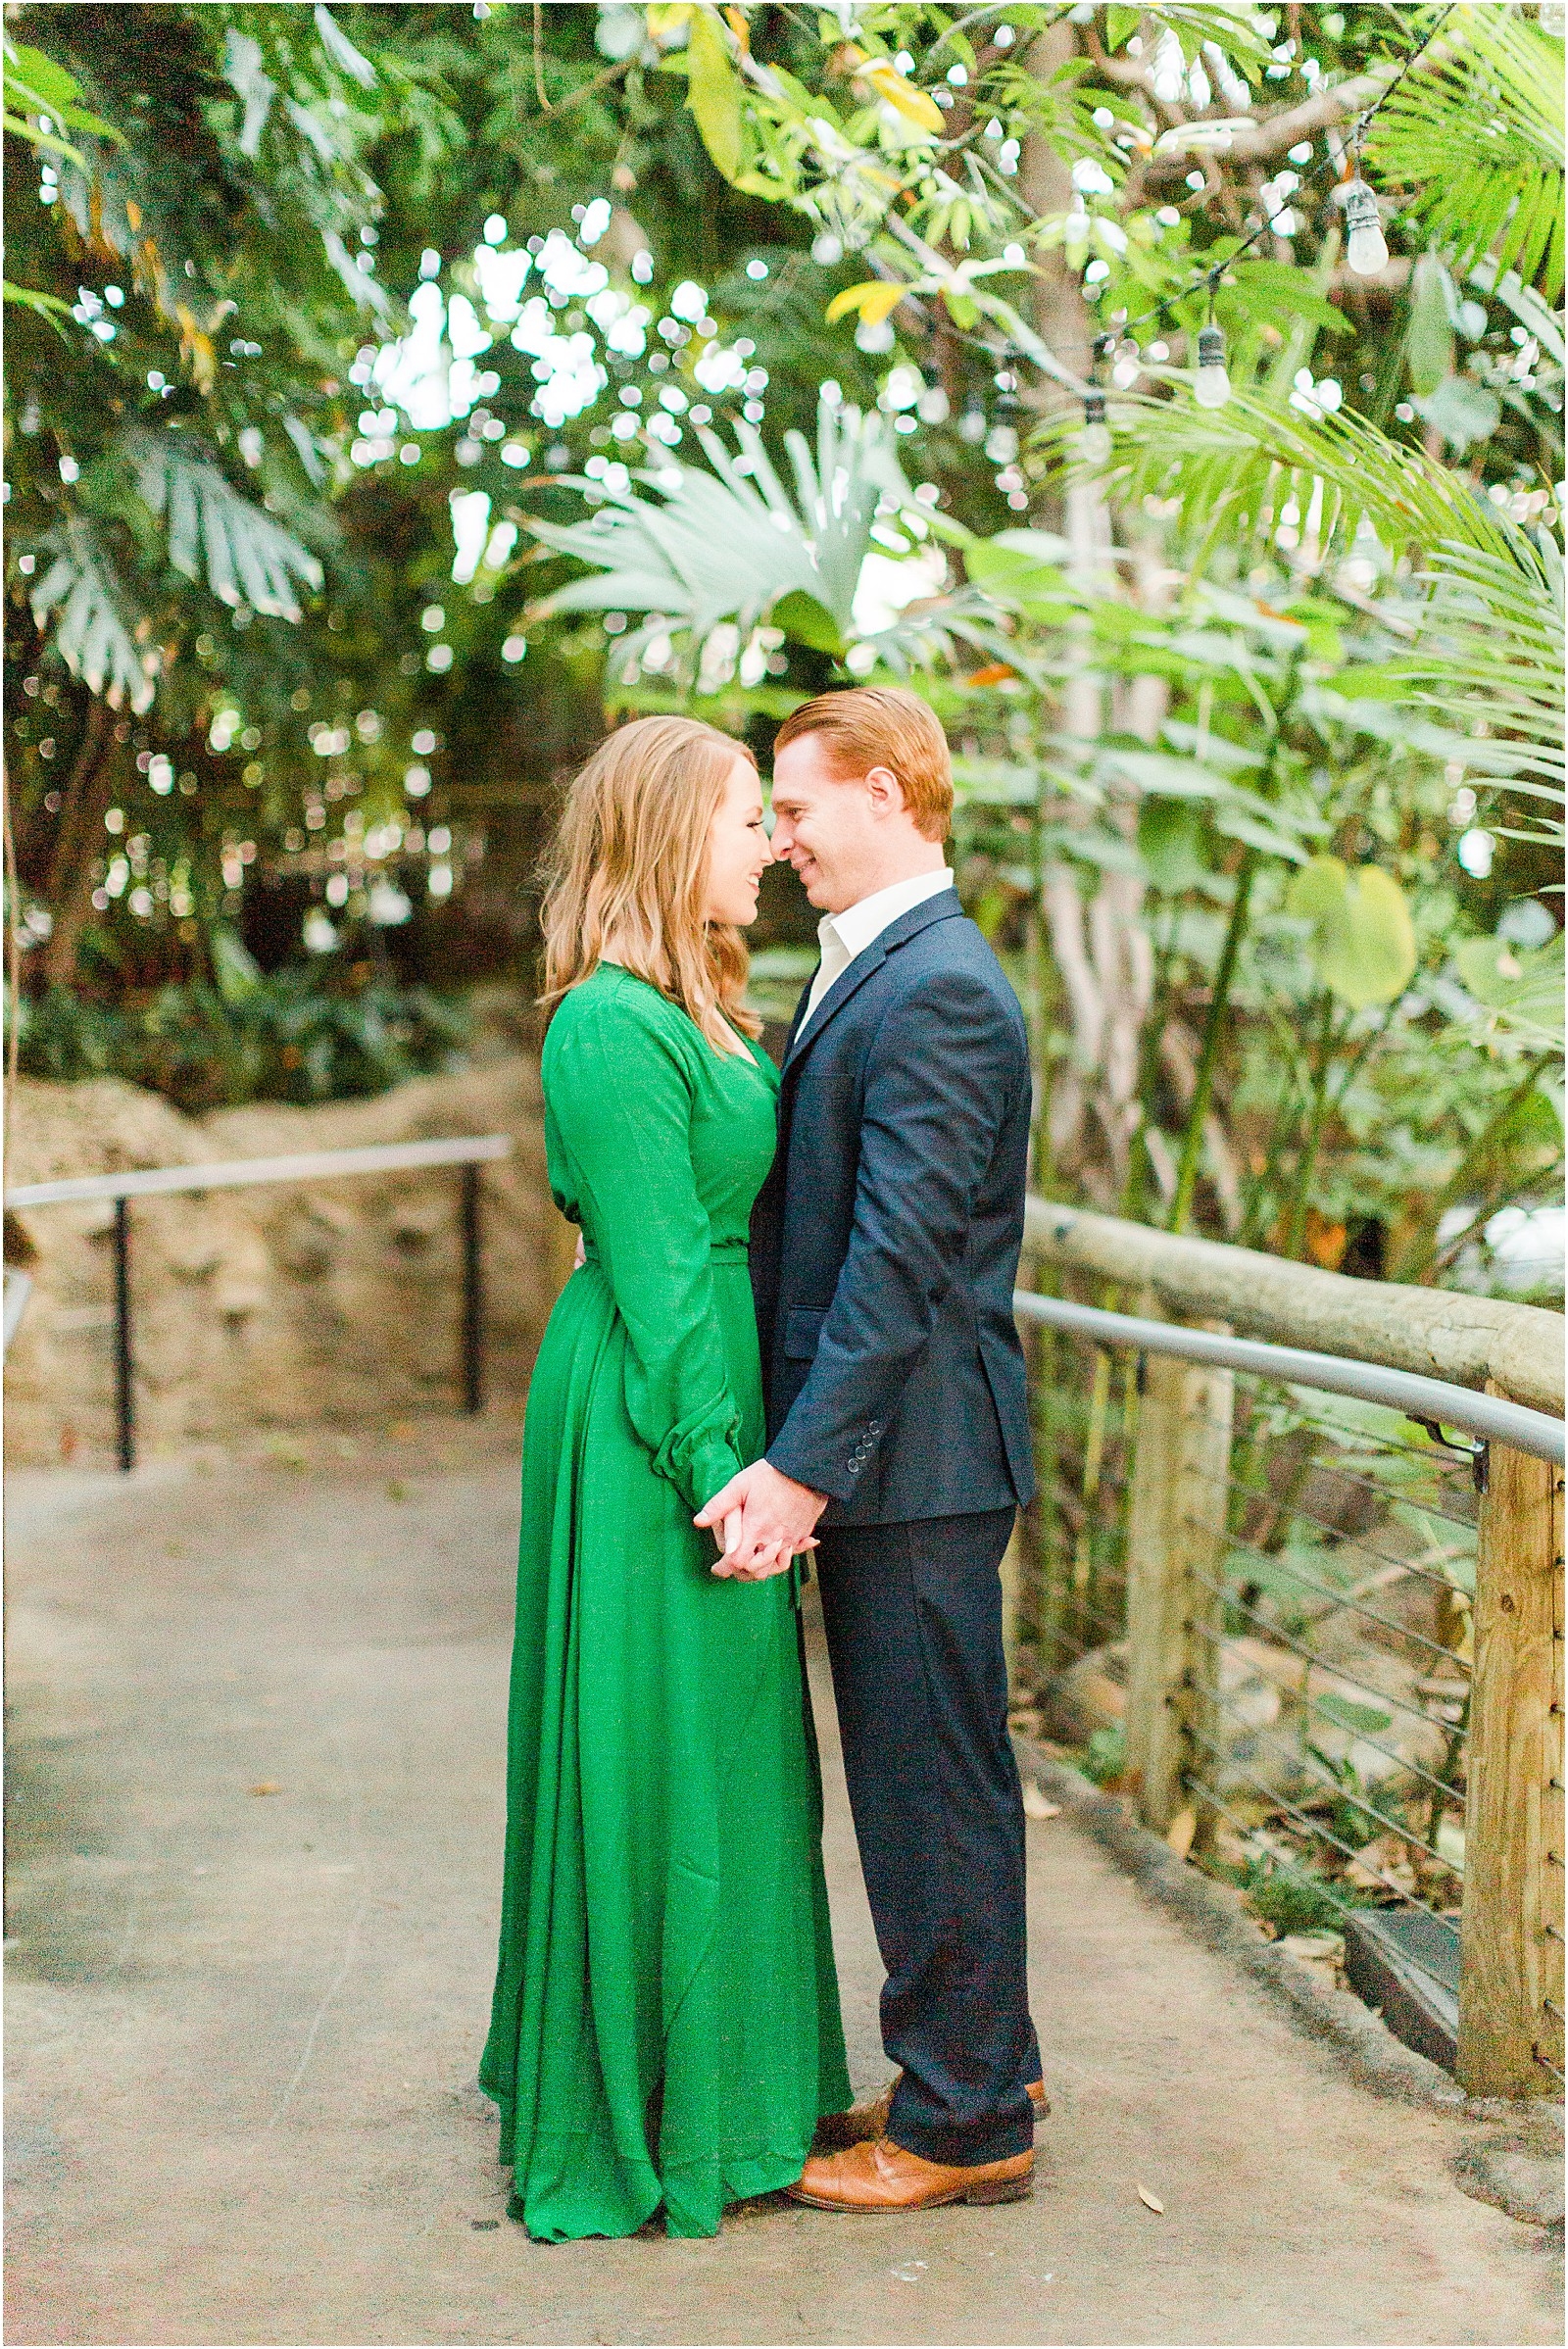 A Mesker Park Zoo Engagement Session | Jennah and Steve | Bret and Brandie Photography030.jpg